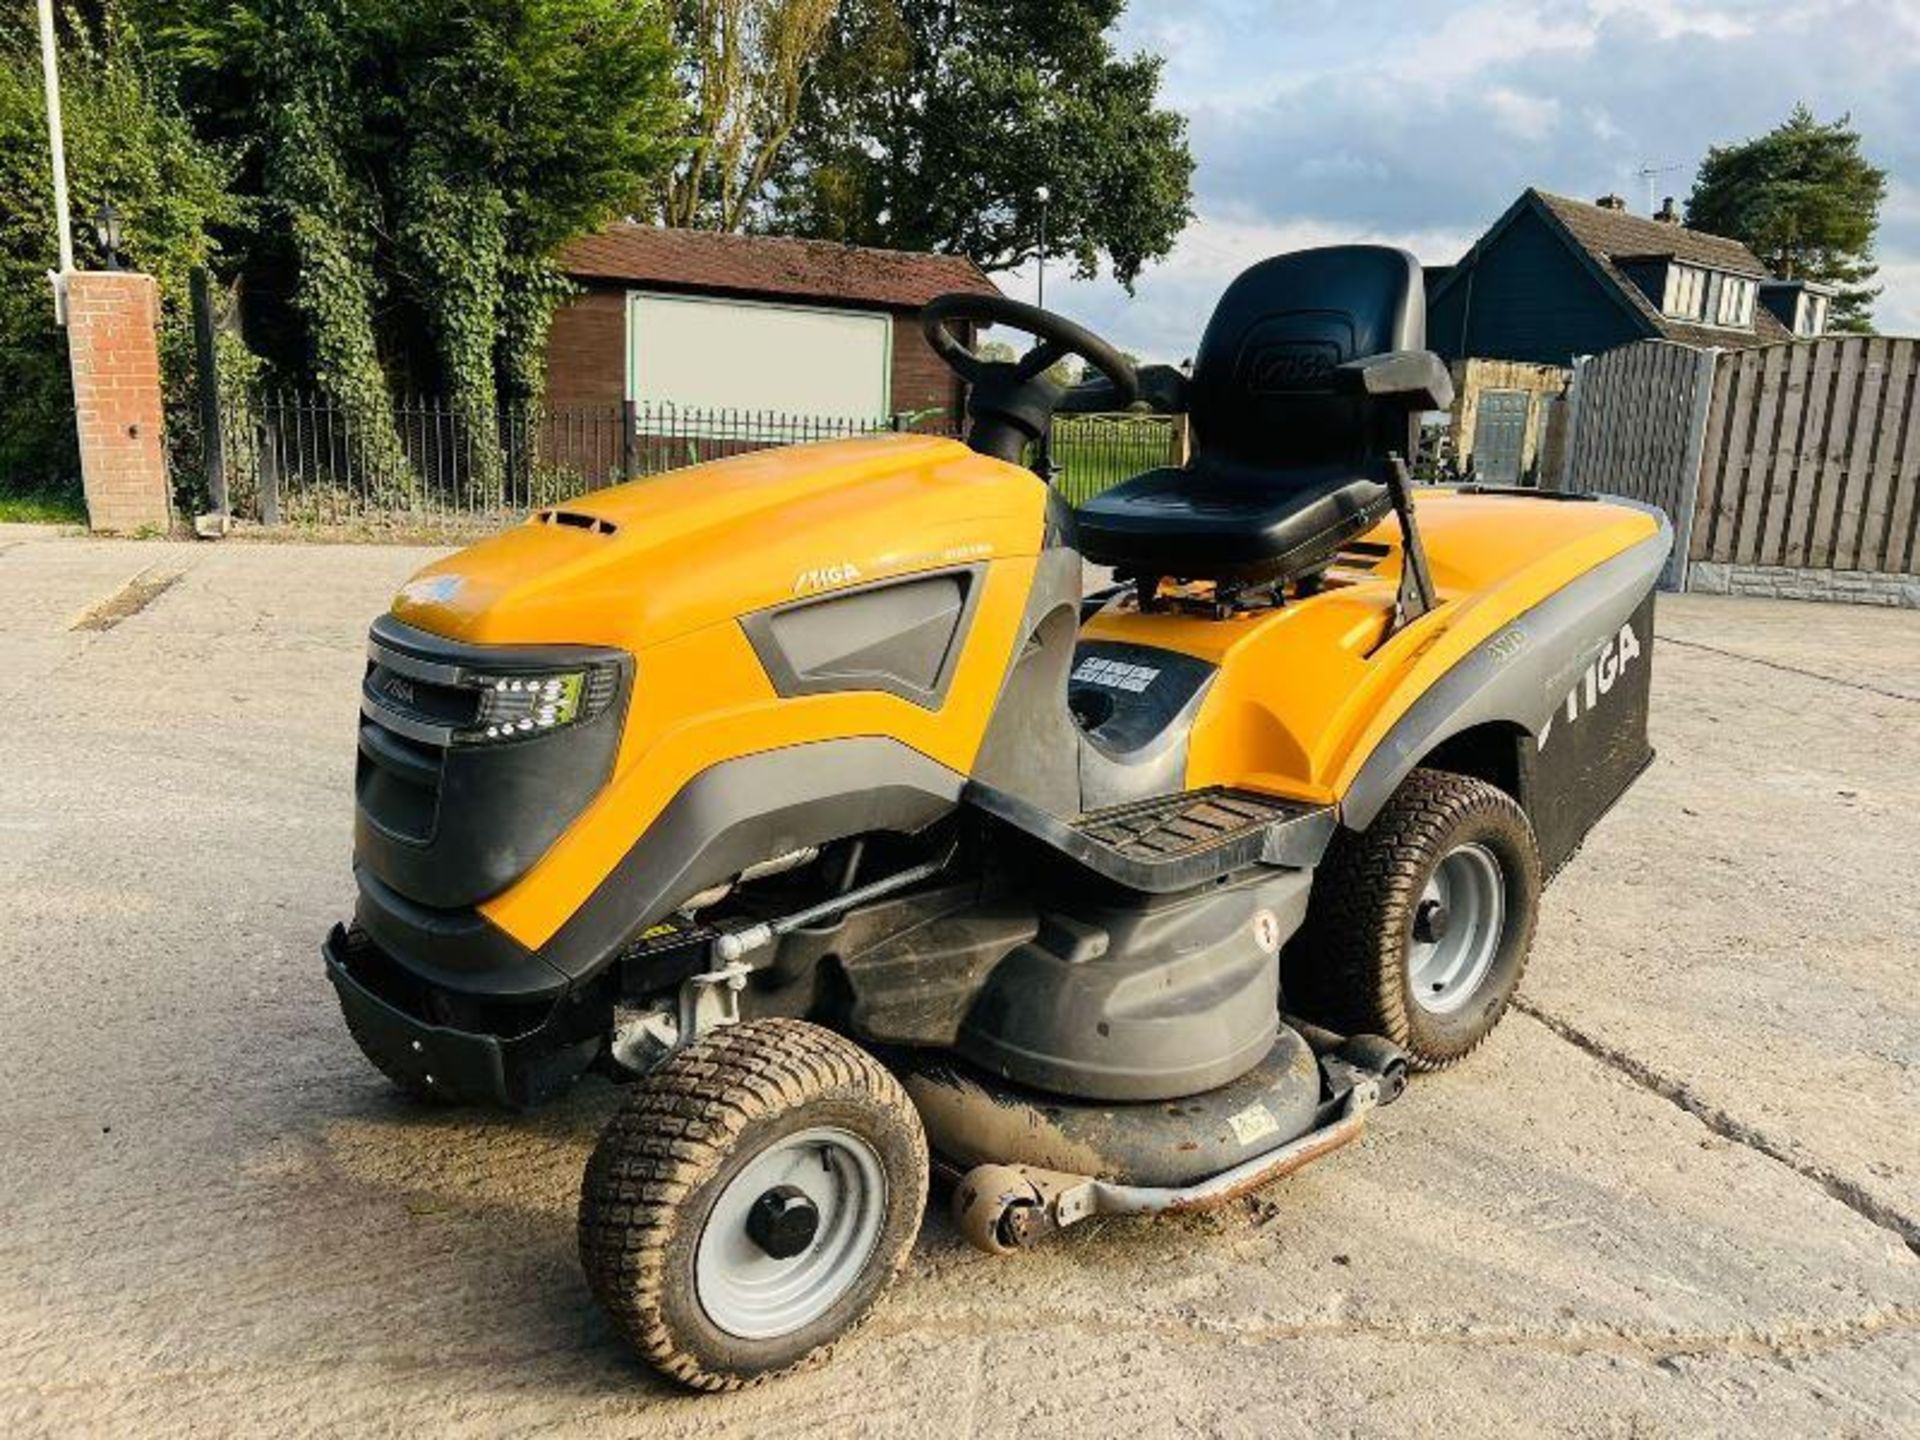 STIGA 4WD RIDE ON MOWER *YEAR 2016, 240 HOURS* C/W COLLECTION BOX 